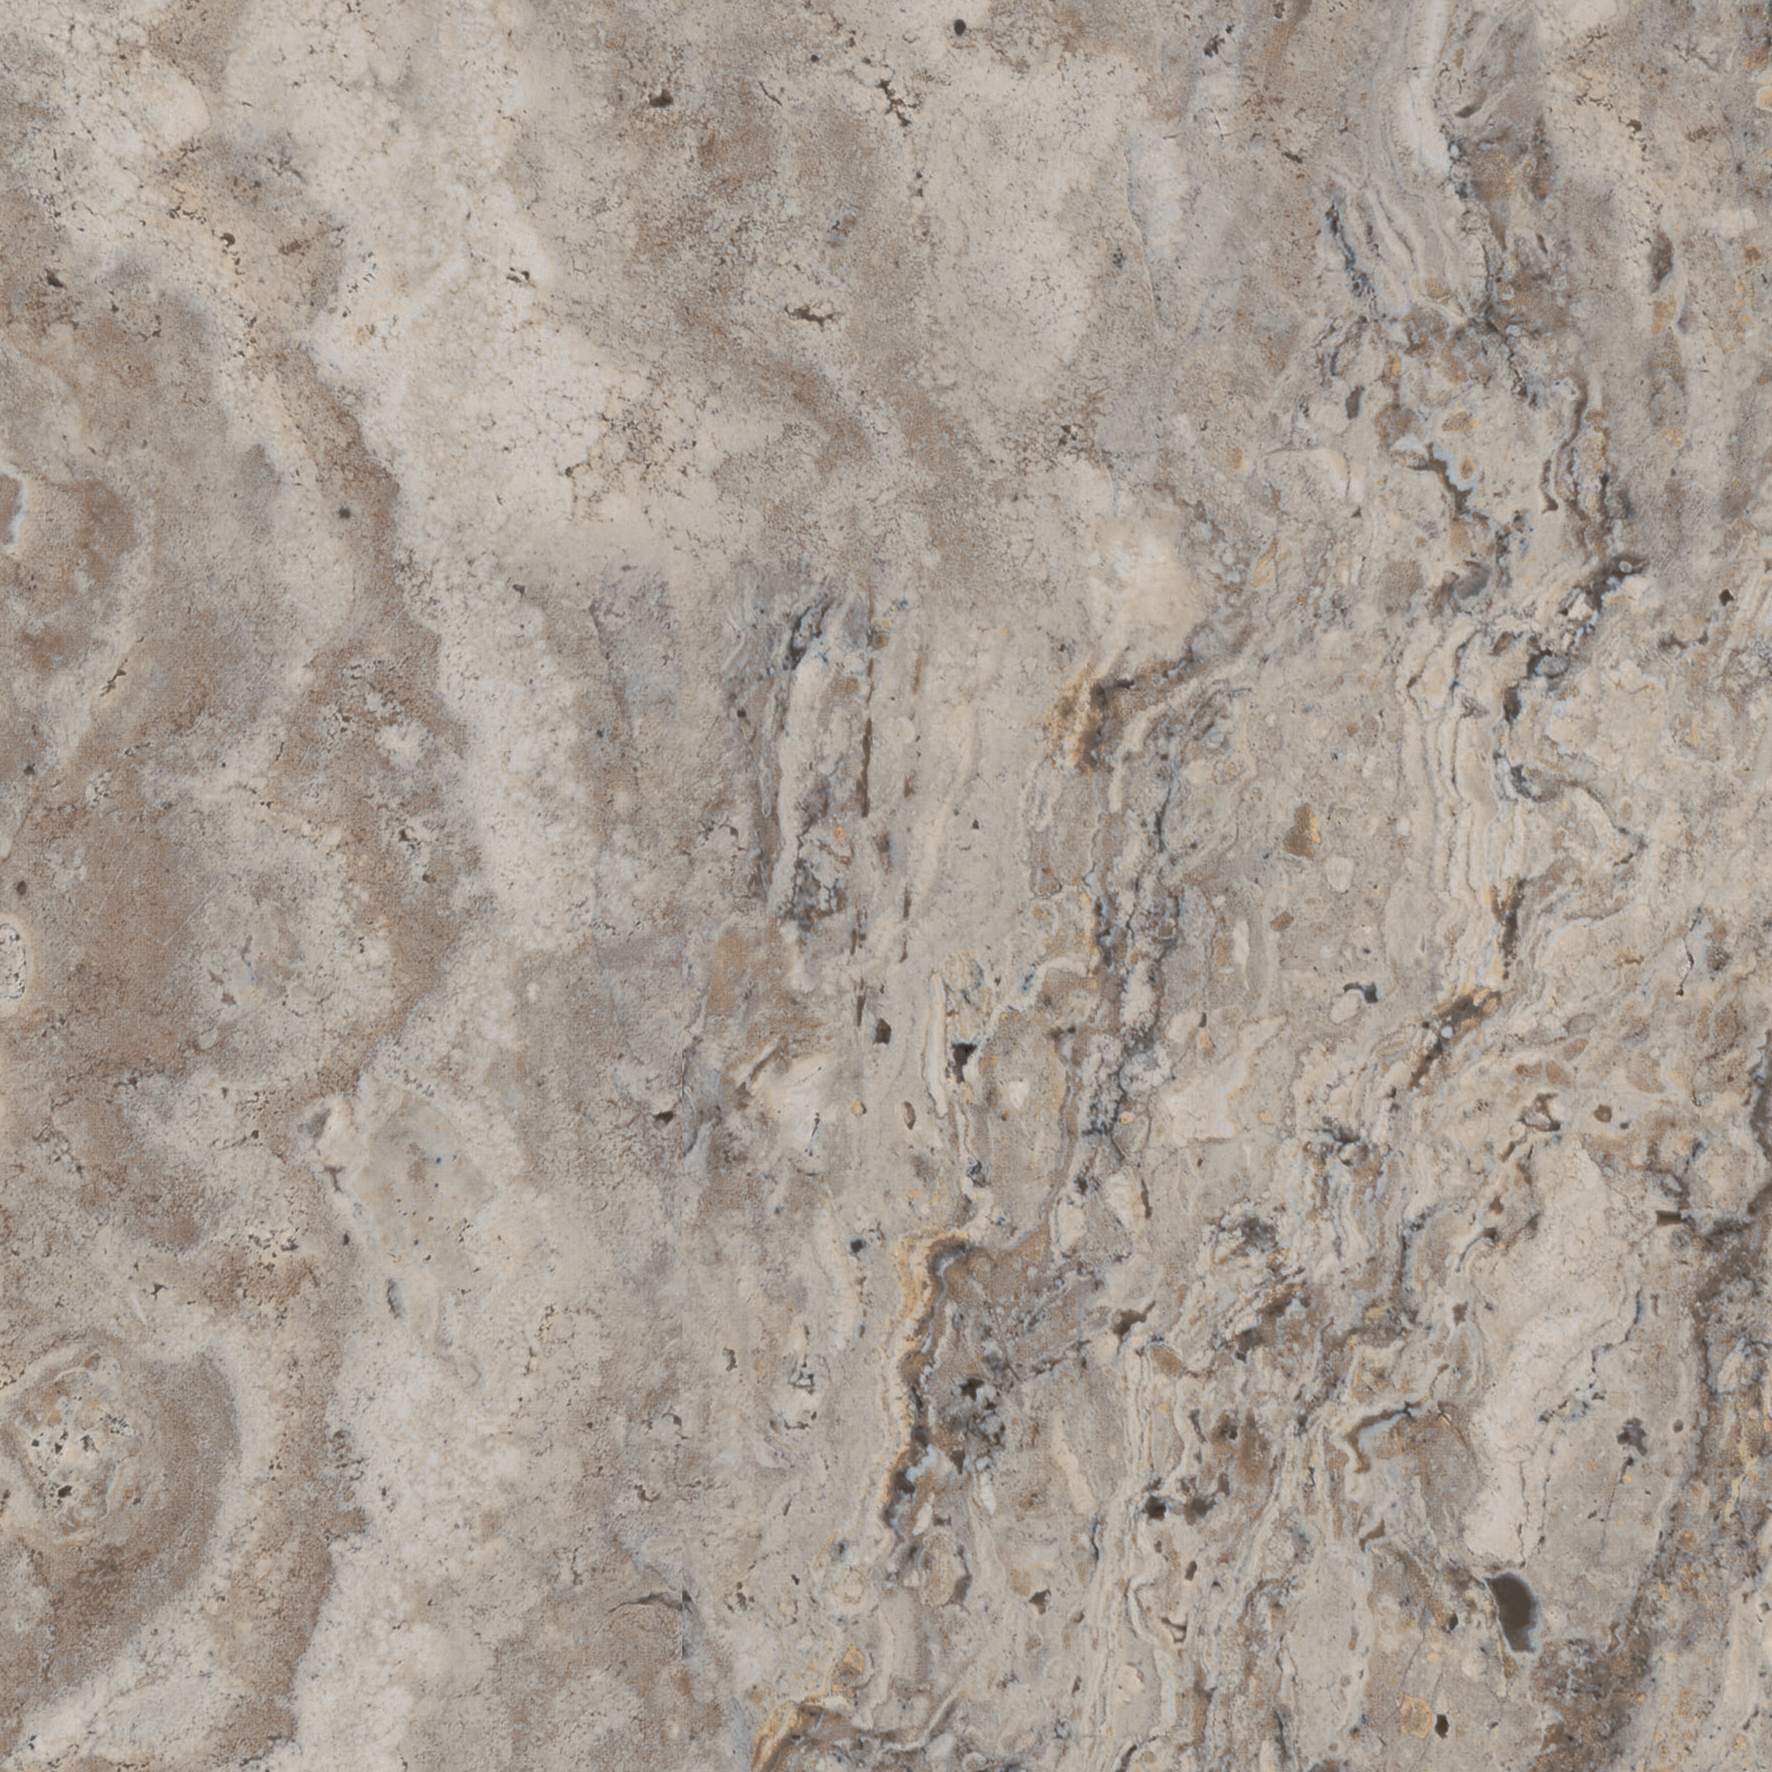 walnut pattern glazed porcelain field tile from antico anatolia collection distributed by surface group international matte finish pressed edge 6x6 square shape